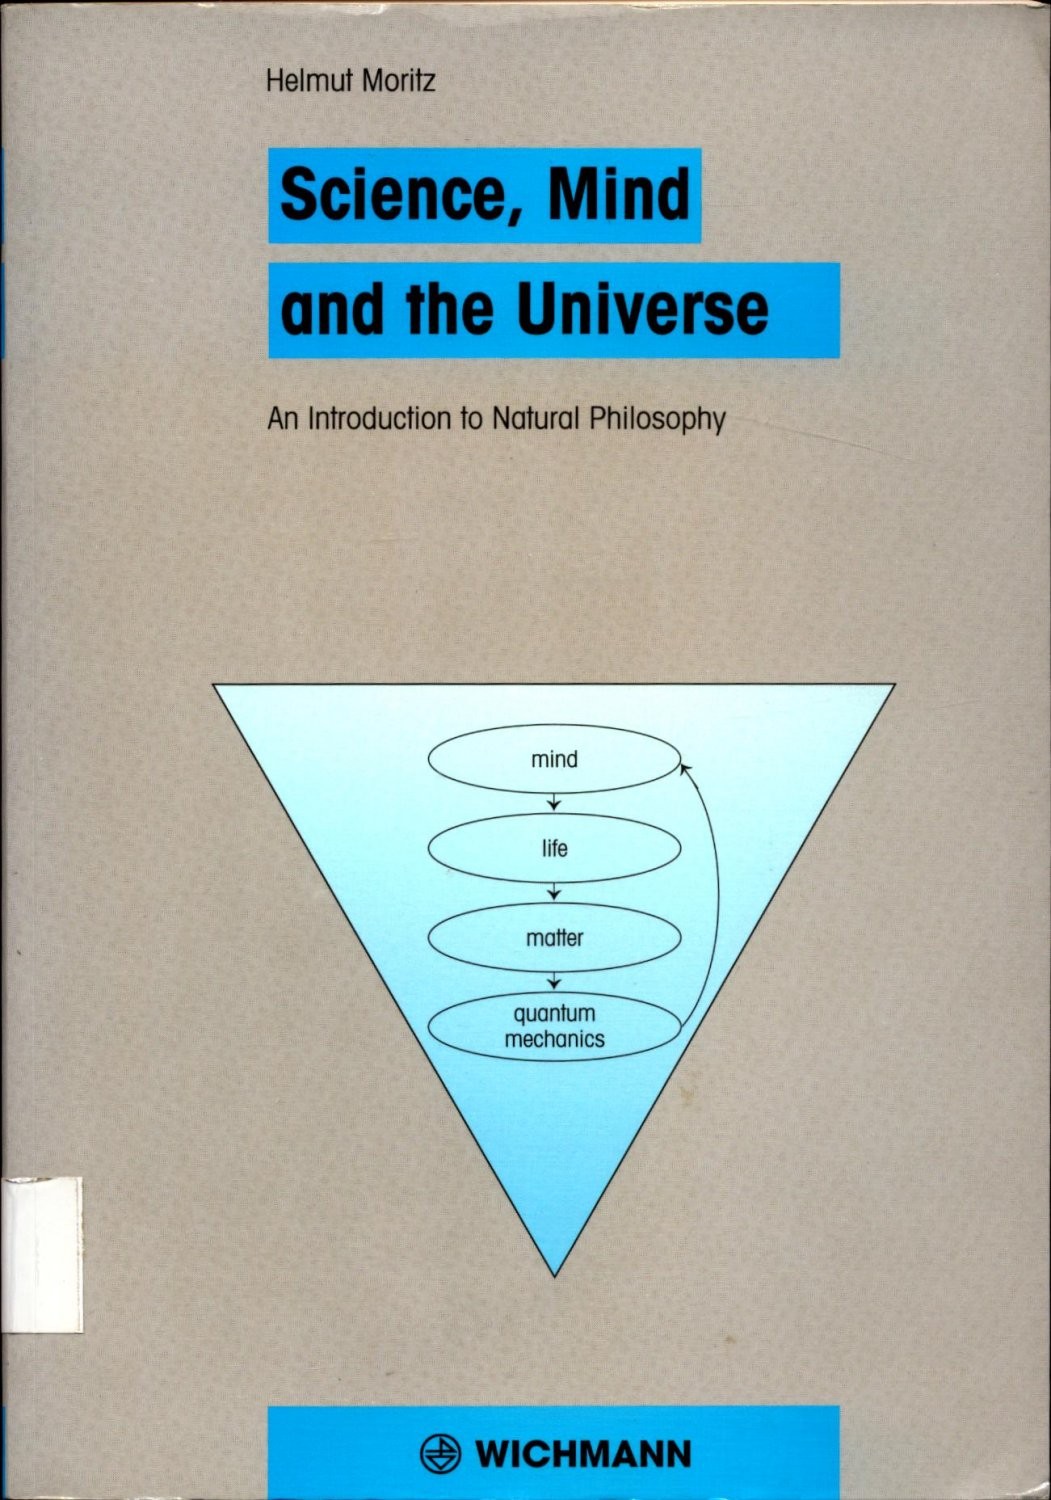 Science, Mind and the Universe: An Introduction to Natural Philosophy